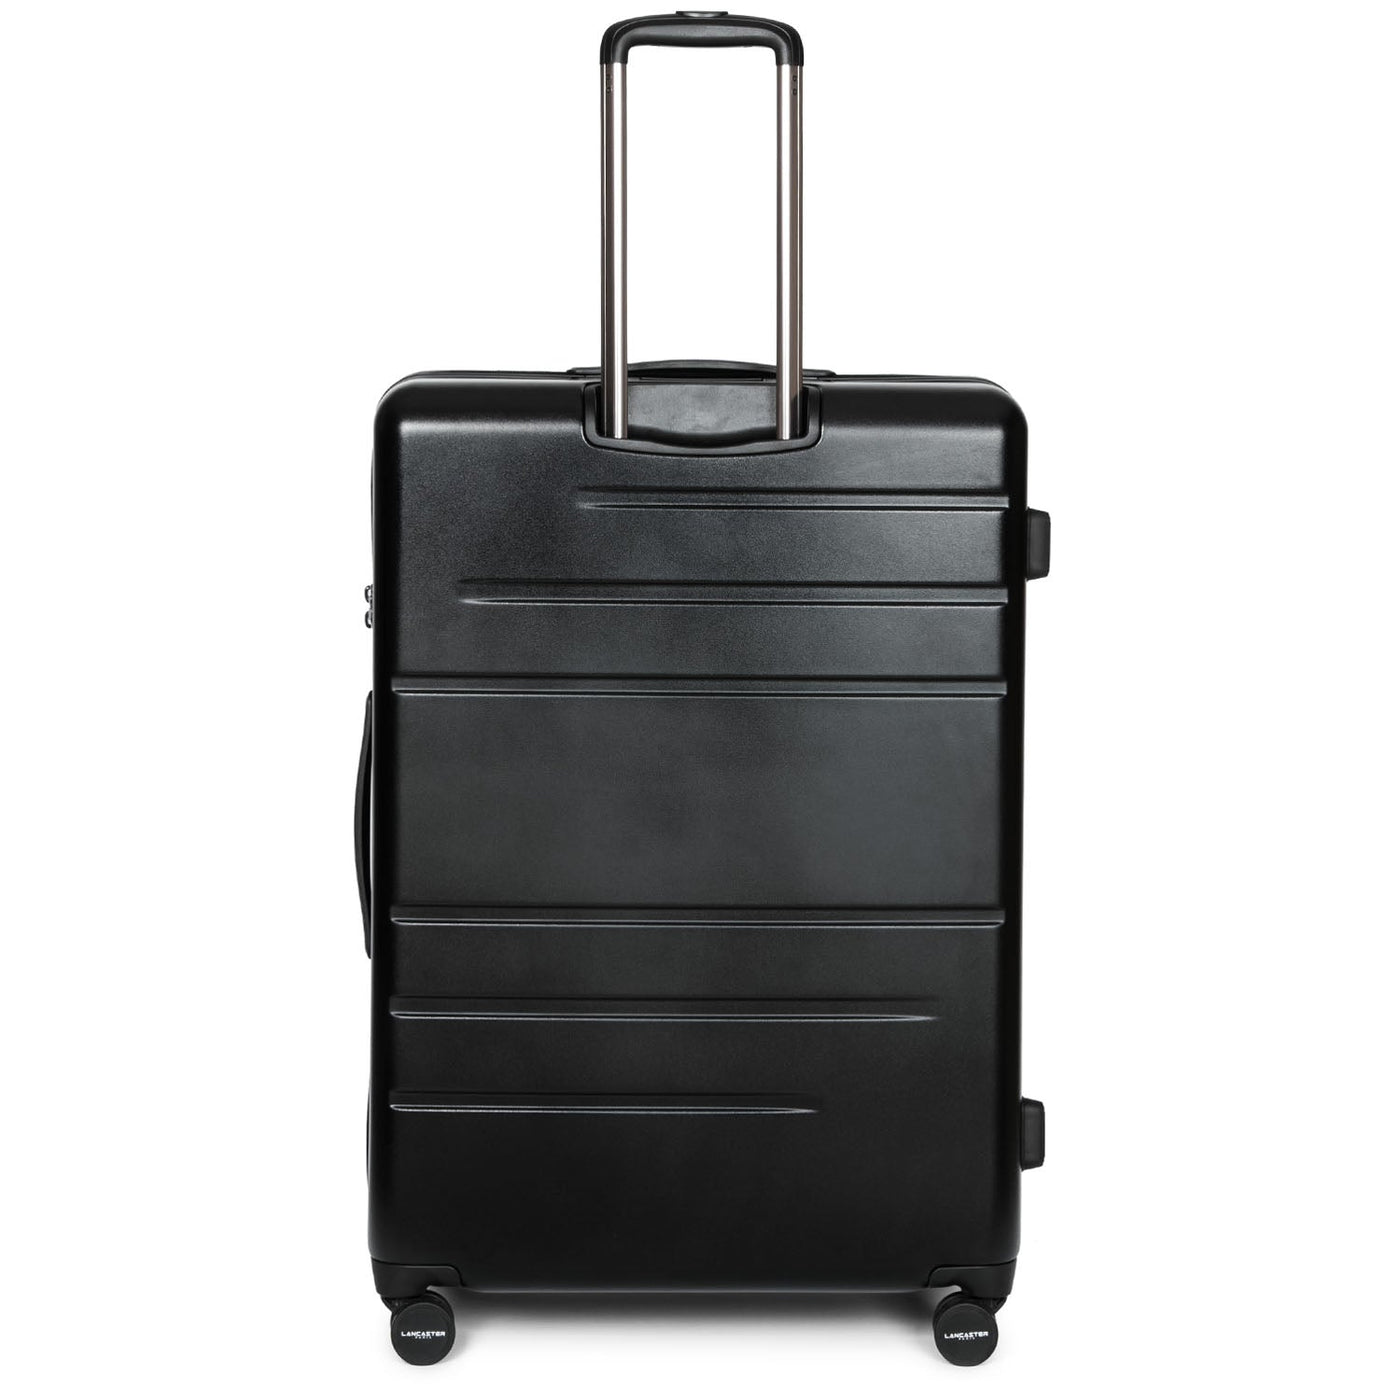 assortment of 3 luggage - luggage #couleur_noir